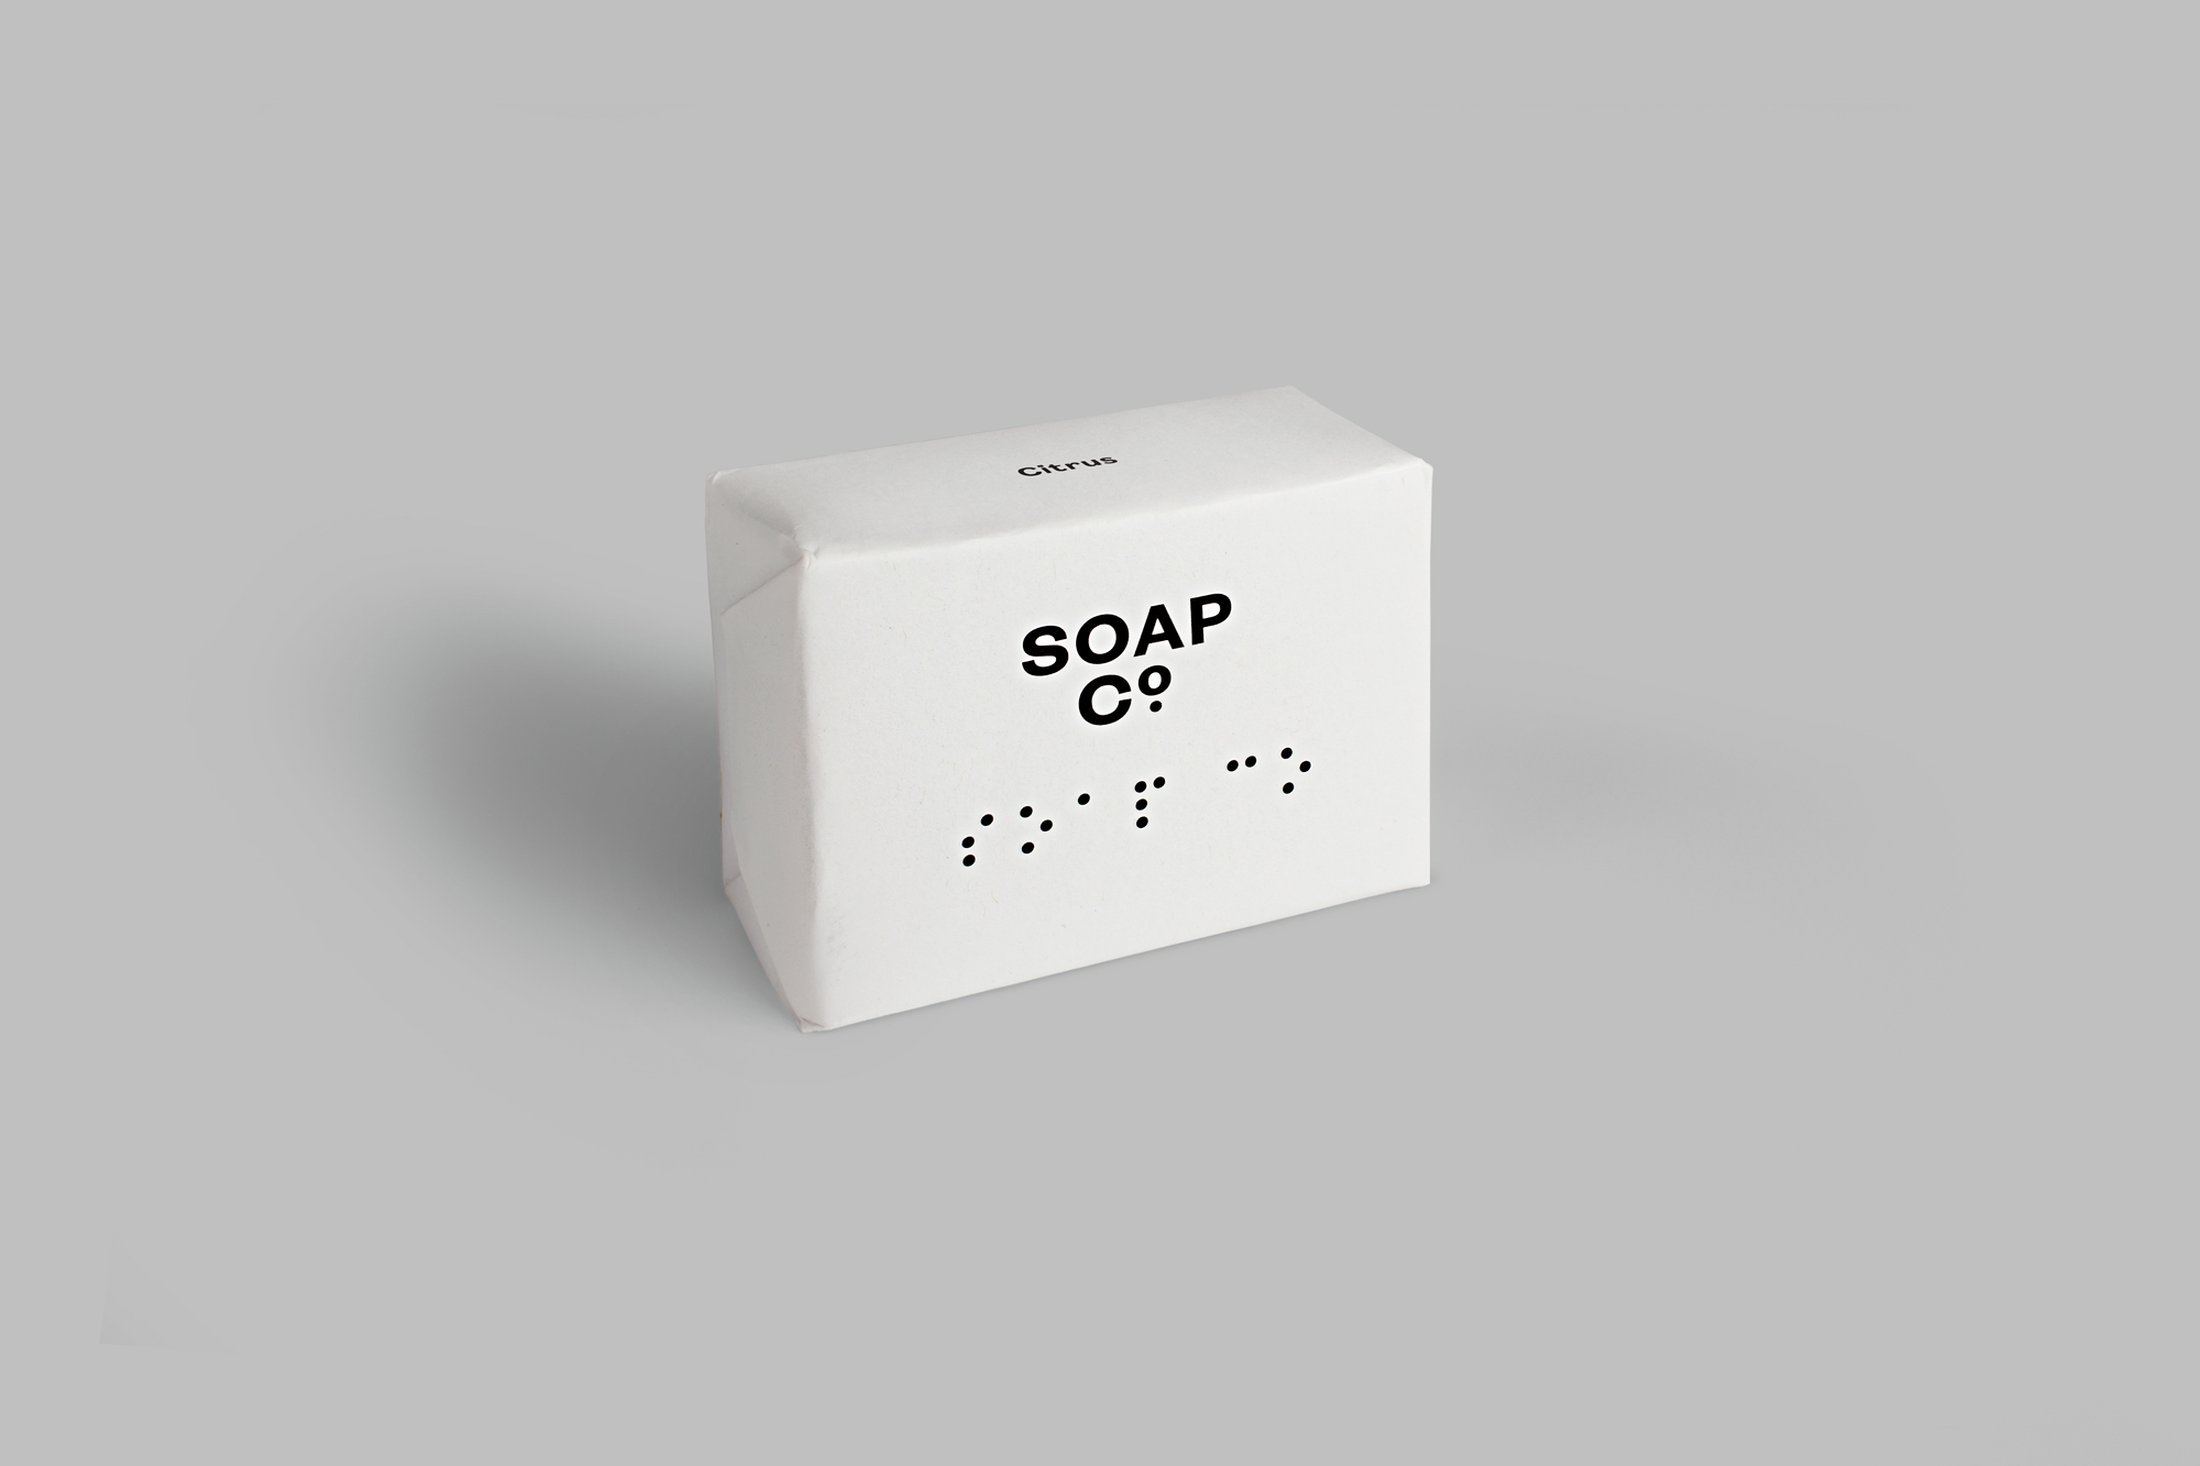 Logo and package design by UK based graphic design studio Paul Balford Ltd. for luxury hand made soap business the Soap Co. 